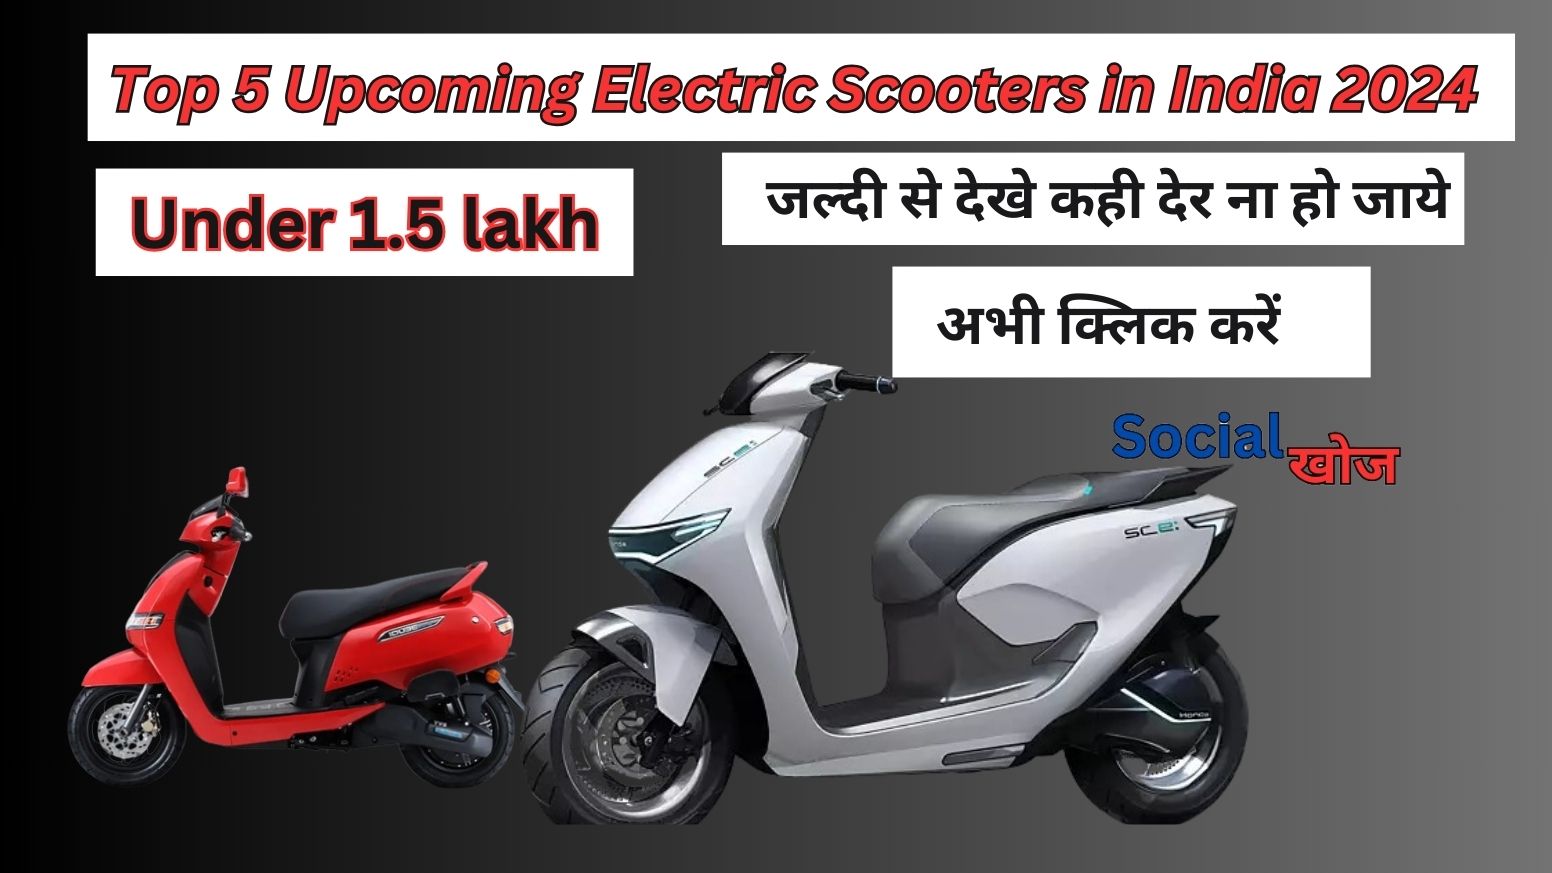 Top 5 Upcoming Electric Scooters in India 2024